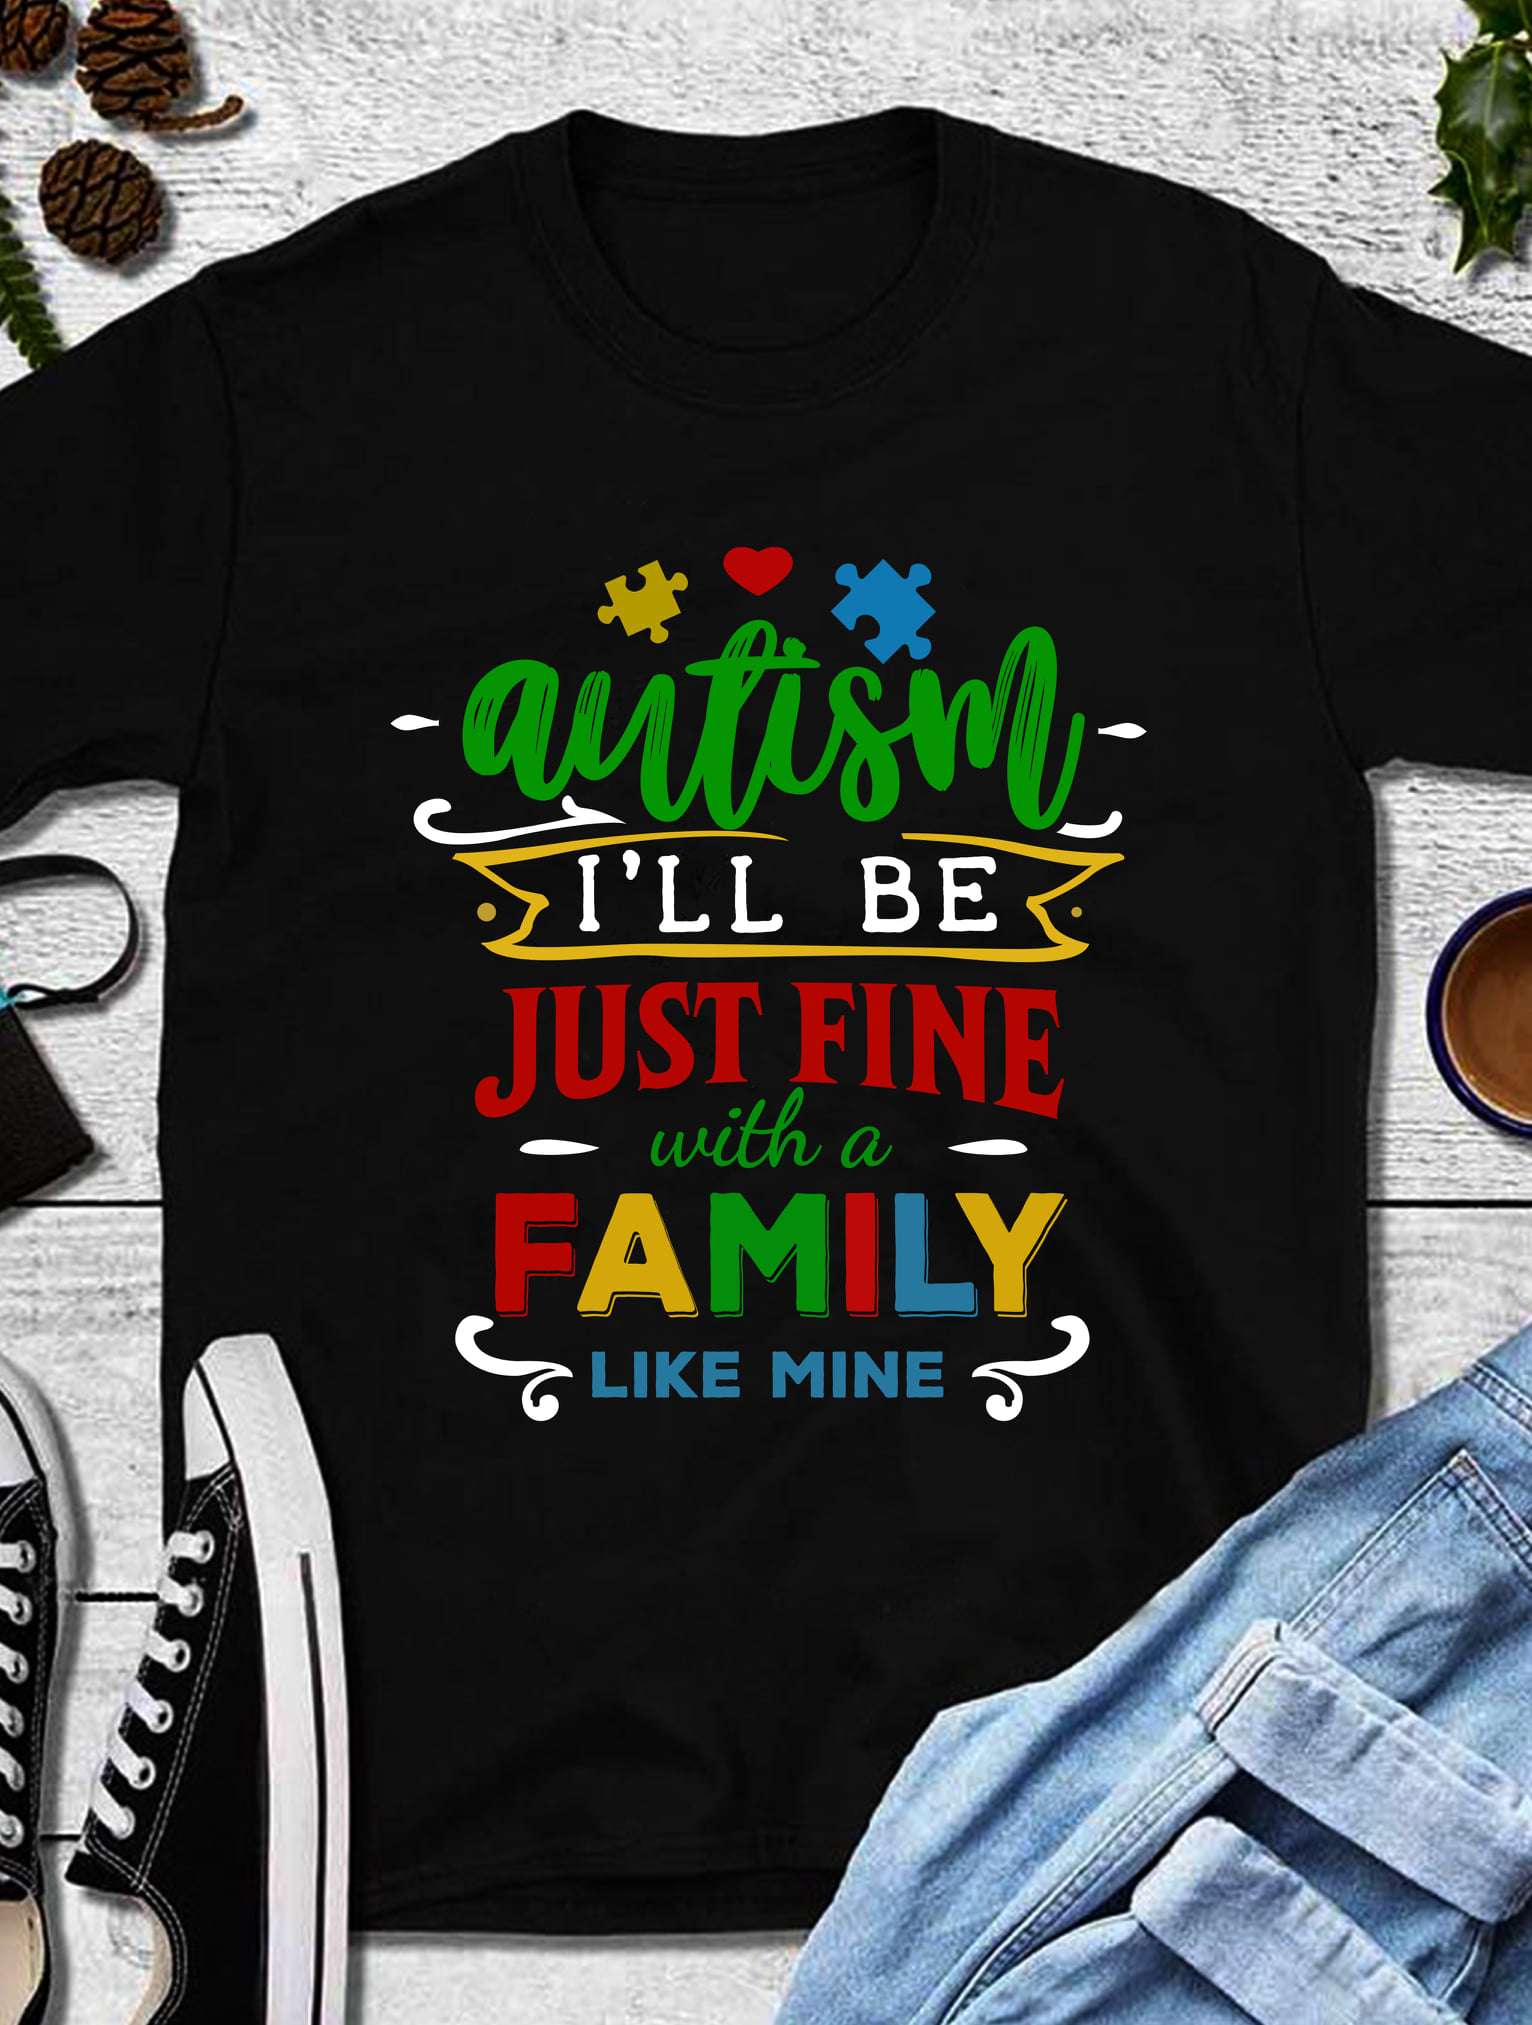 Autism I'll be just fine with a family like mine - Autism family, autism awareness